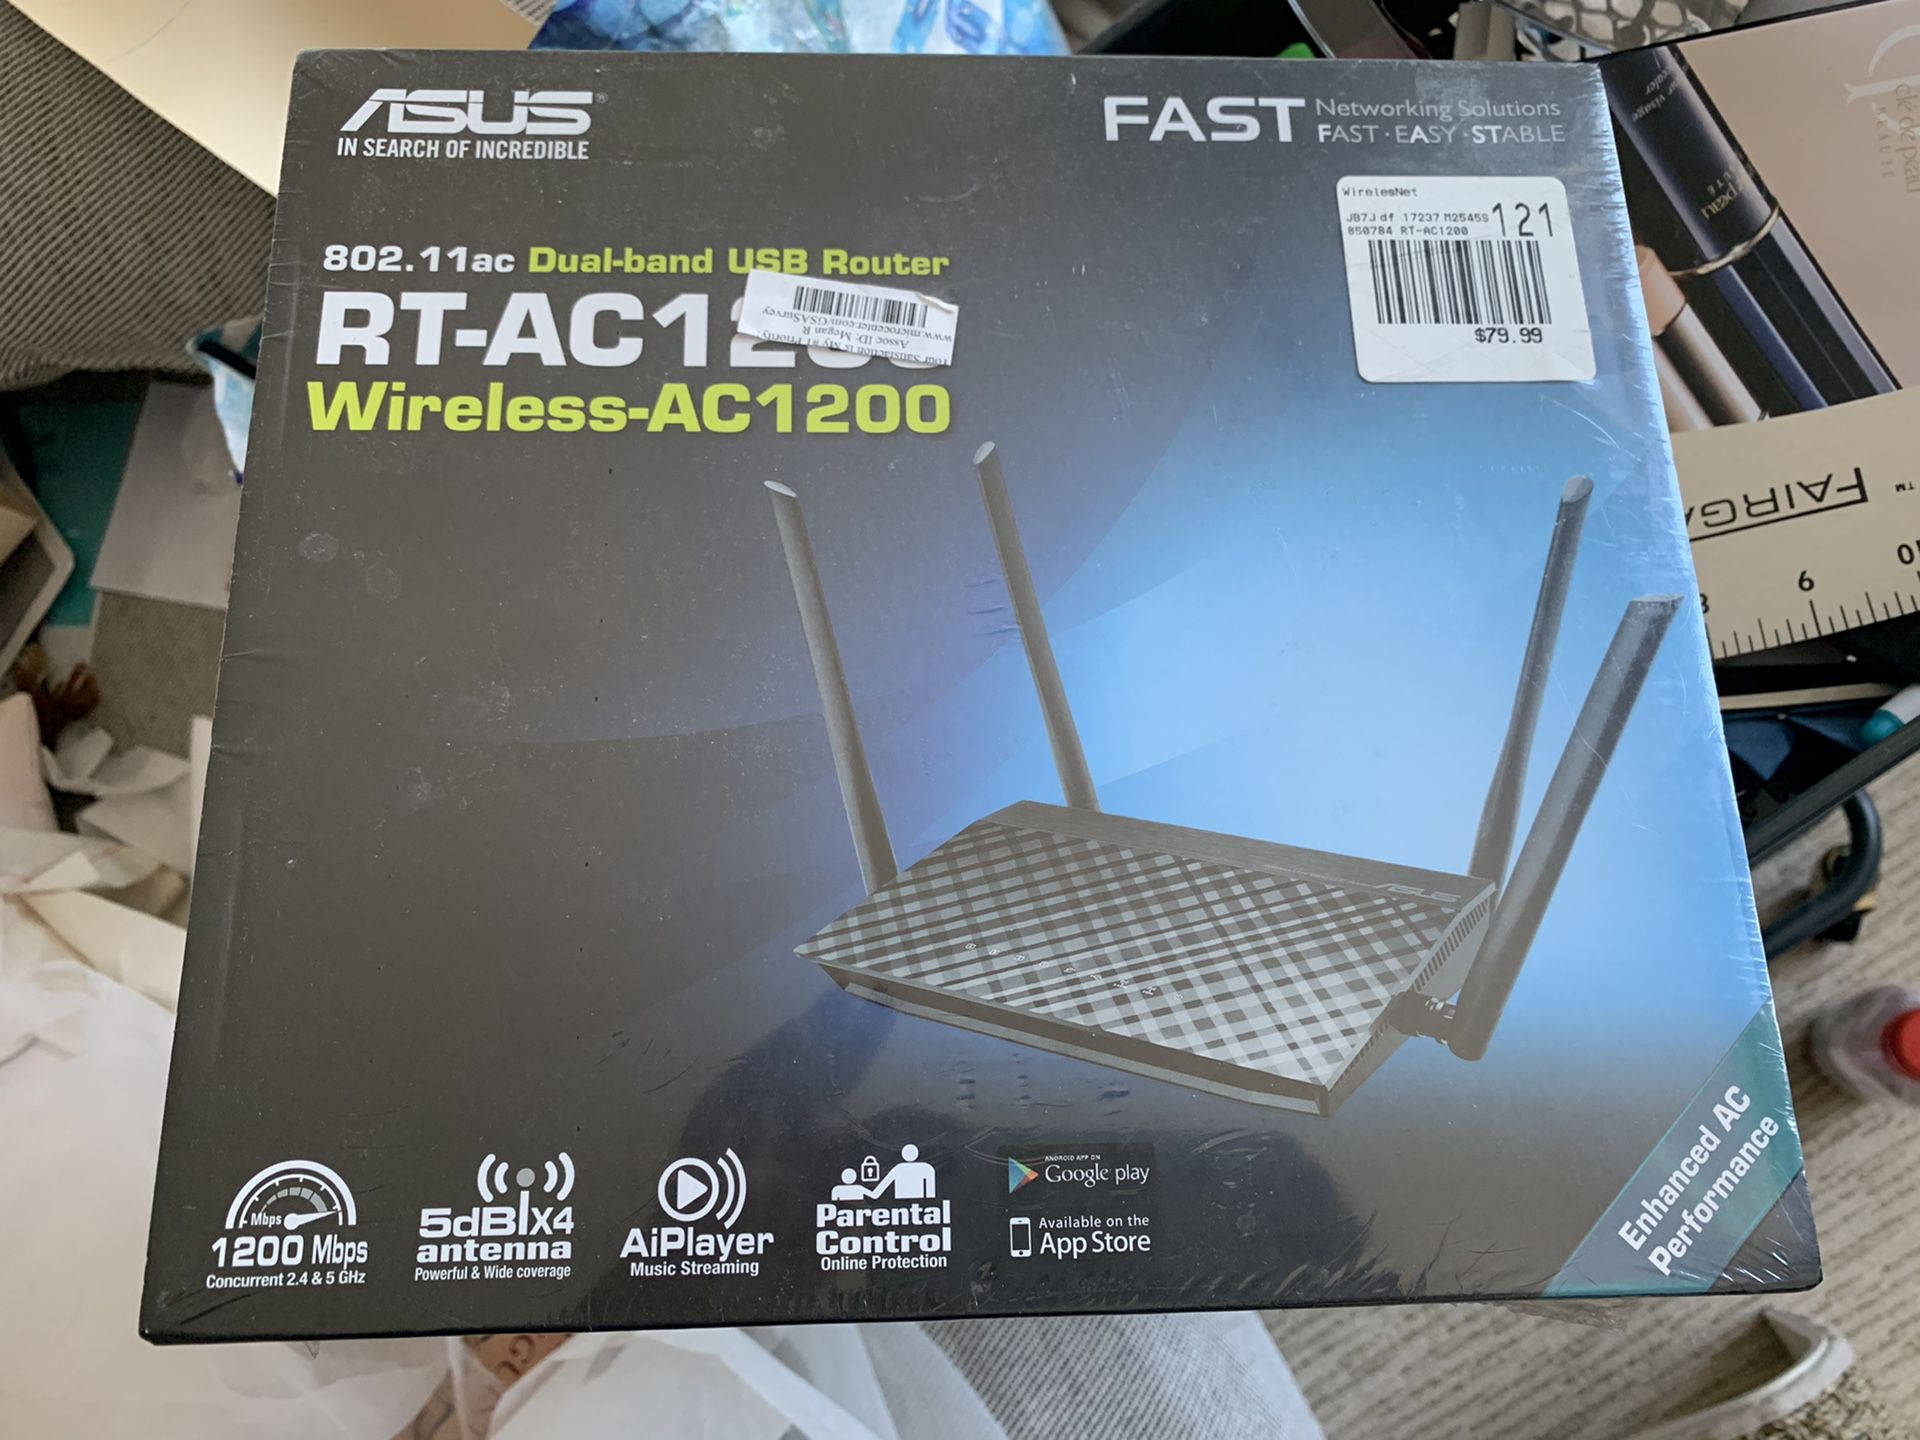 Asus Dual-band Router, BRAND NEW